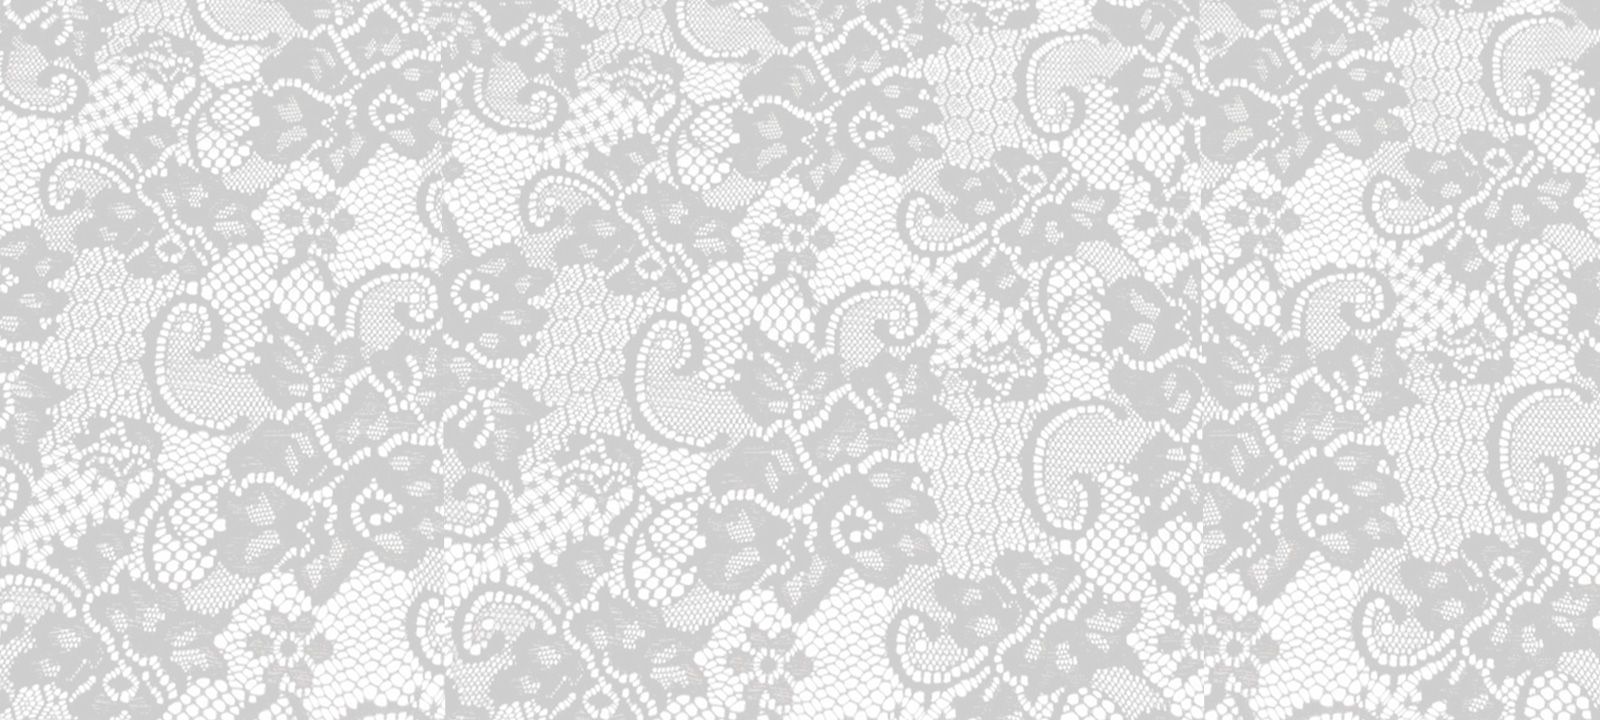 A H Disain Invitations On Backrounds Lace Wallpaper